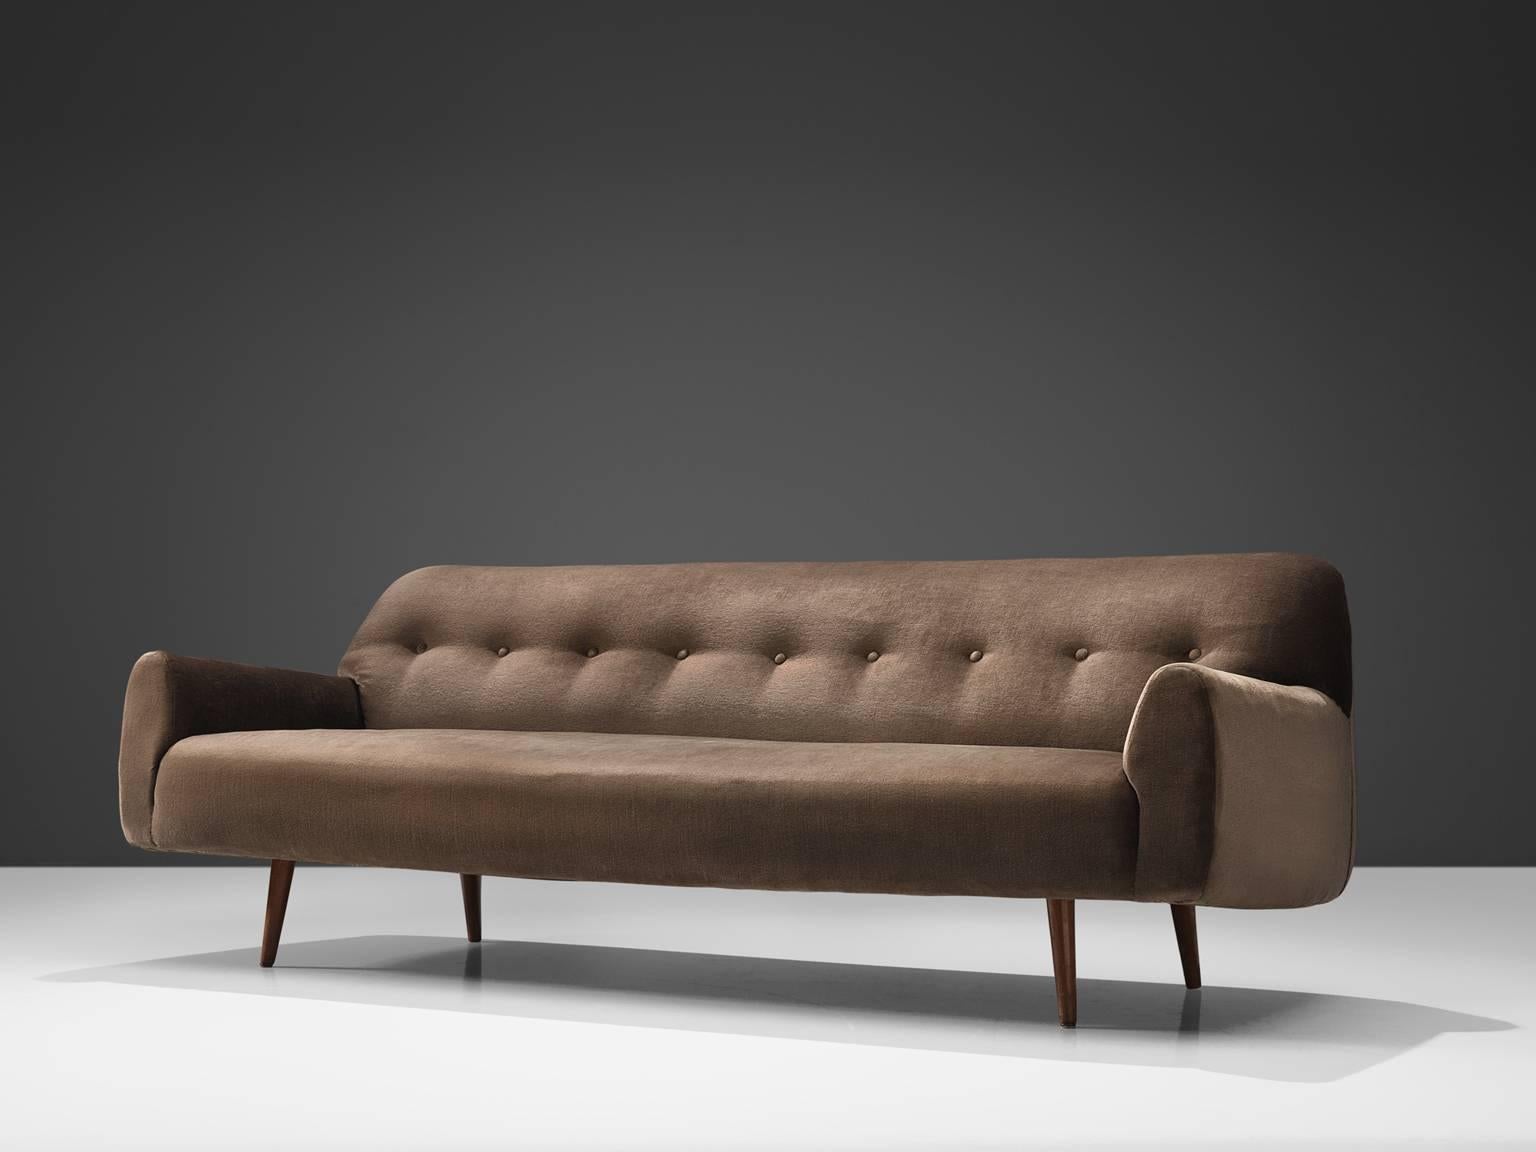 Sofa, velvet, wood, Europe, 1960s.

This large three-seat sofa features a dark wooden tapered conical, angled legs. The sofa is voluptuous and thick with rounded corners. The combination of the thin wooden legs and the thick bulky seat form a